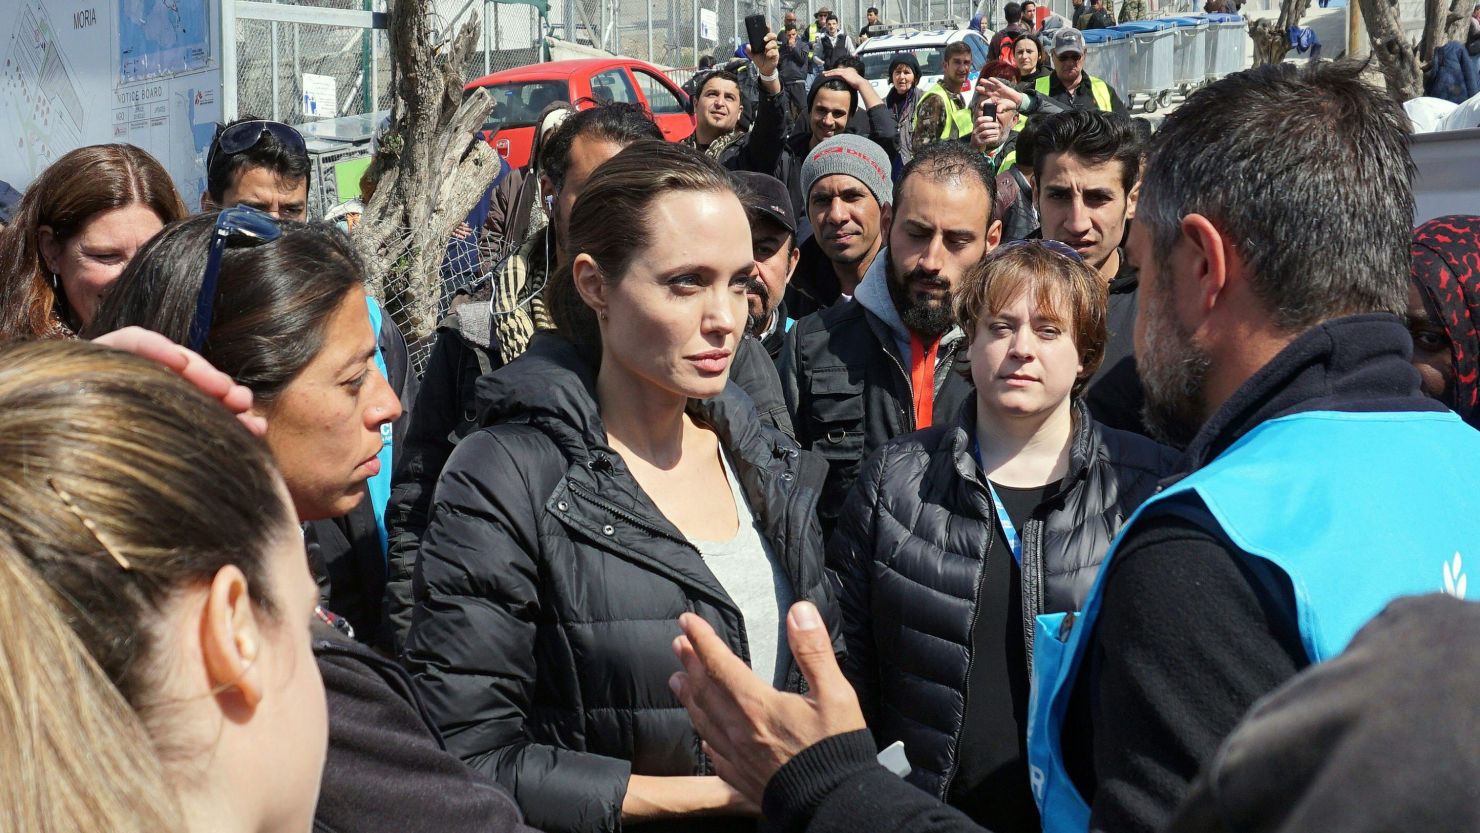 Hollywood star and UN special envoy Angelina Jolie (C) visits a refugee camp in Greece.